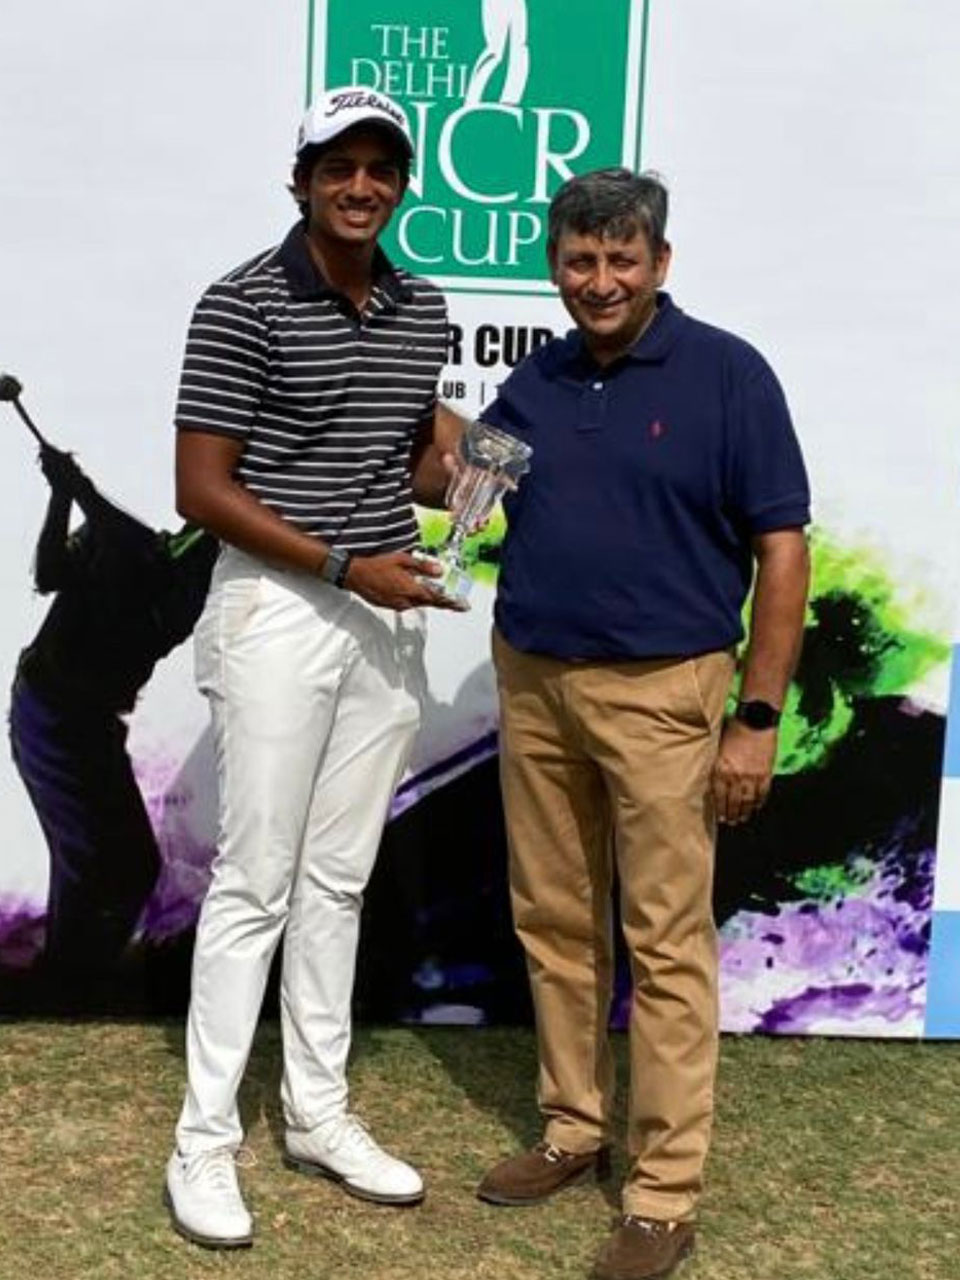 Aryan won his tied 2nd place finish at the Delhi NCR cup